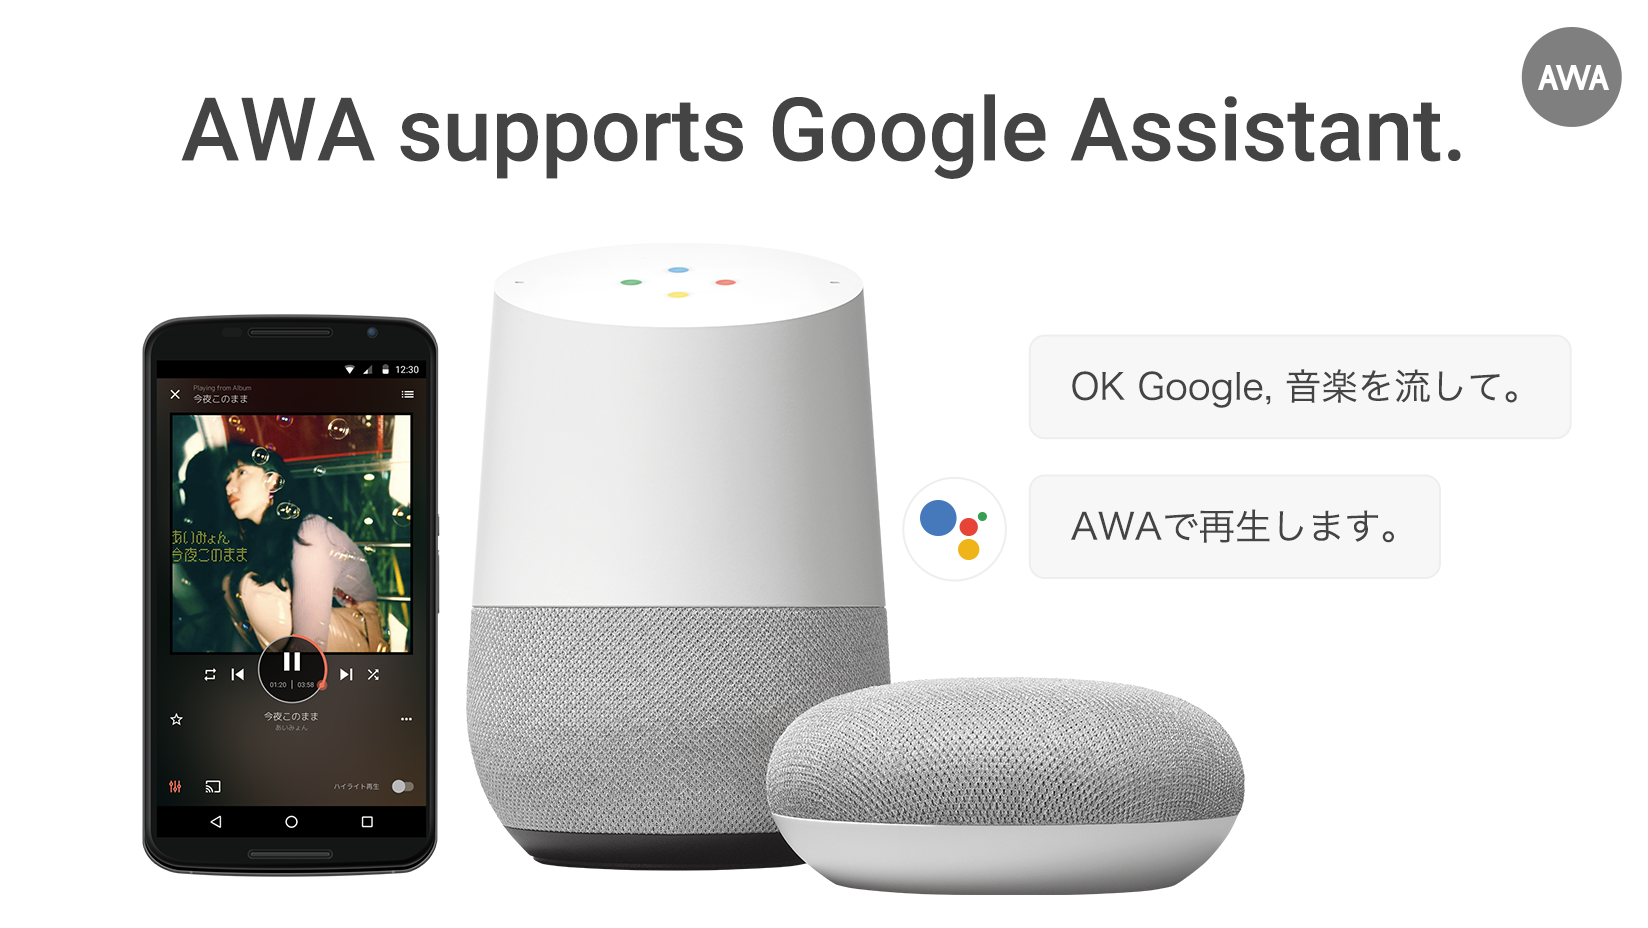 12 Google Assistant commands you need to know